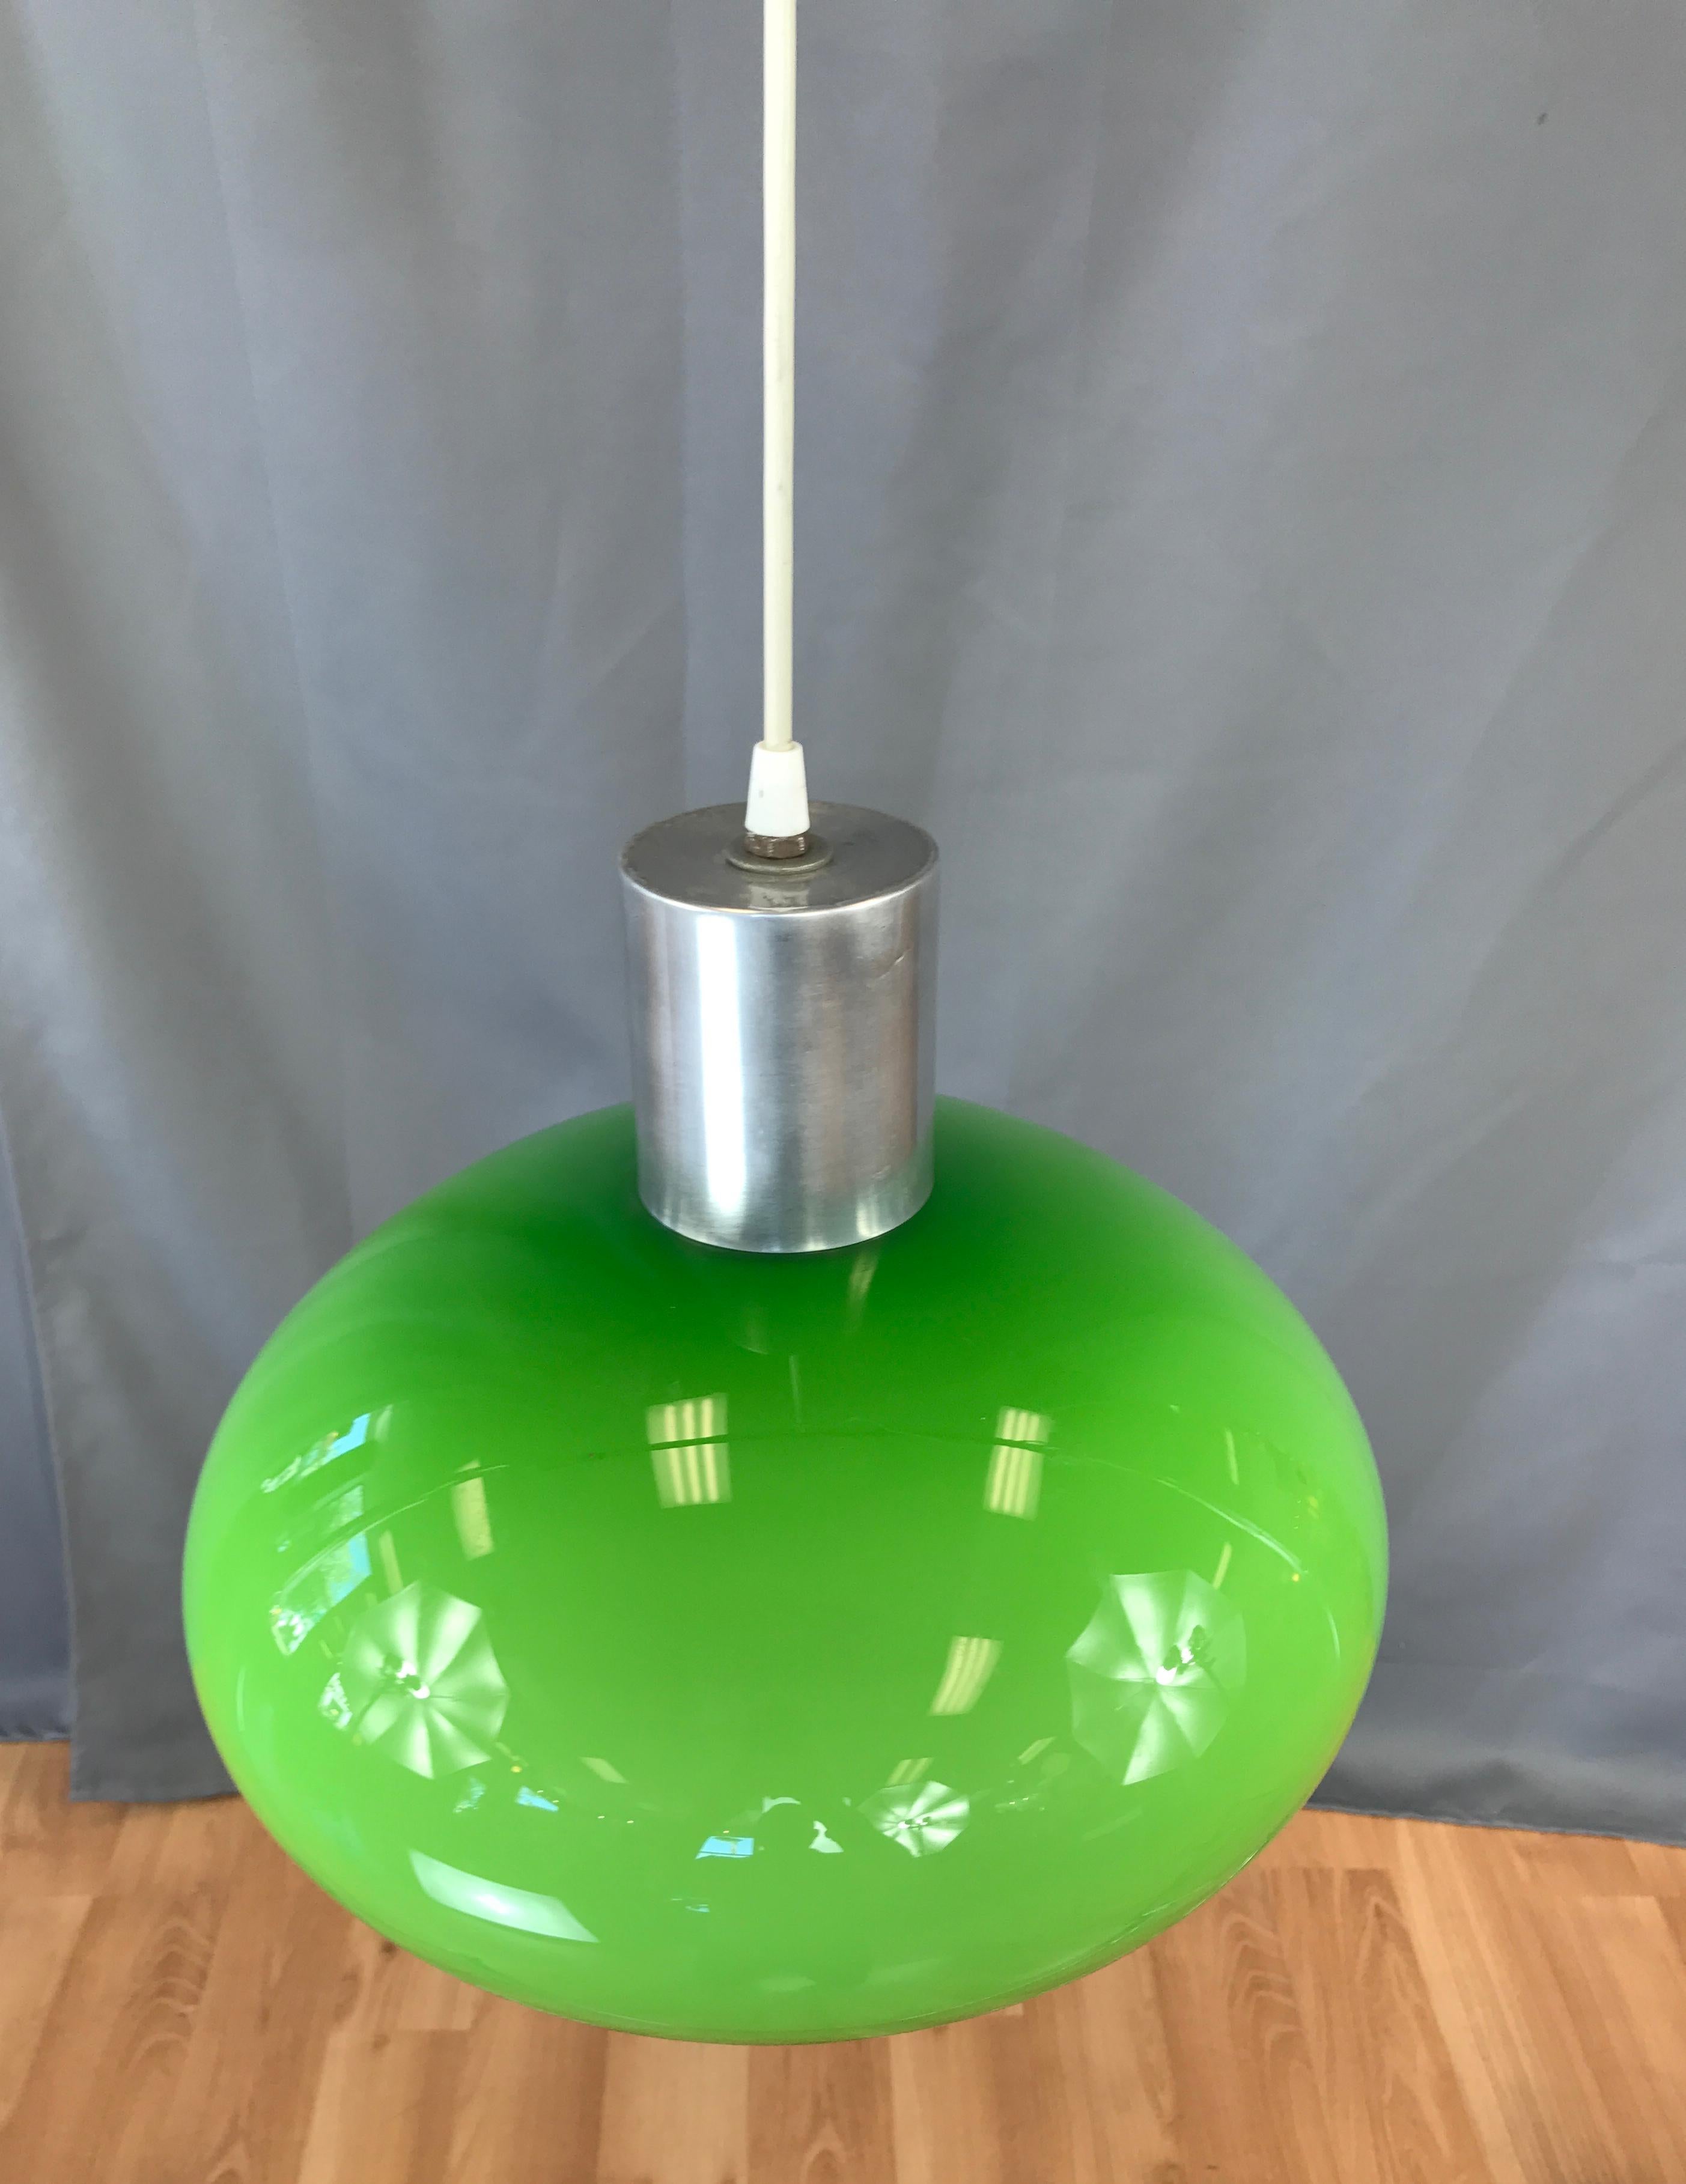 Green cased glass pendant light, circa 1960s.
Shade is green and a white inside, when lit gives a nice glow (last 2 photos) glass shade is attached to a metal cylinder from which the white cord comes out. The long cord has a two prong plug, but